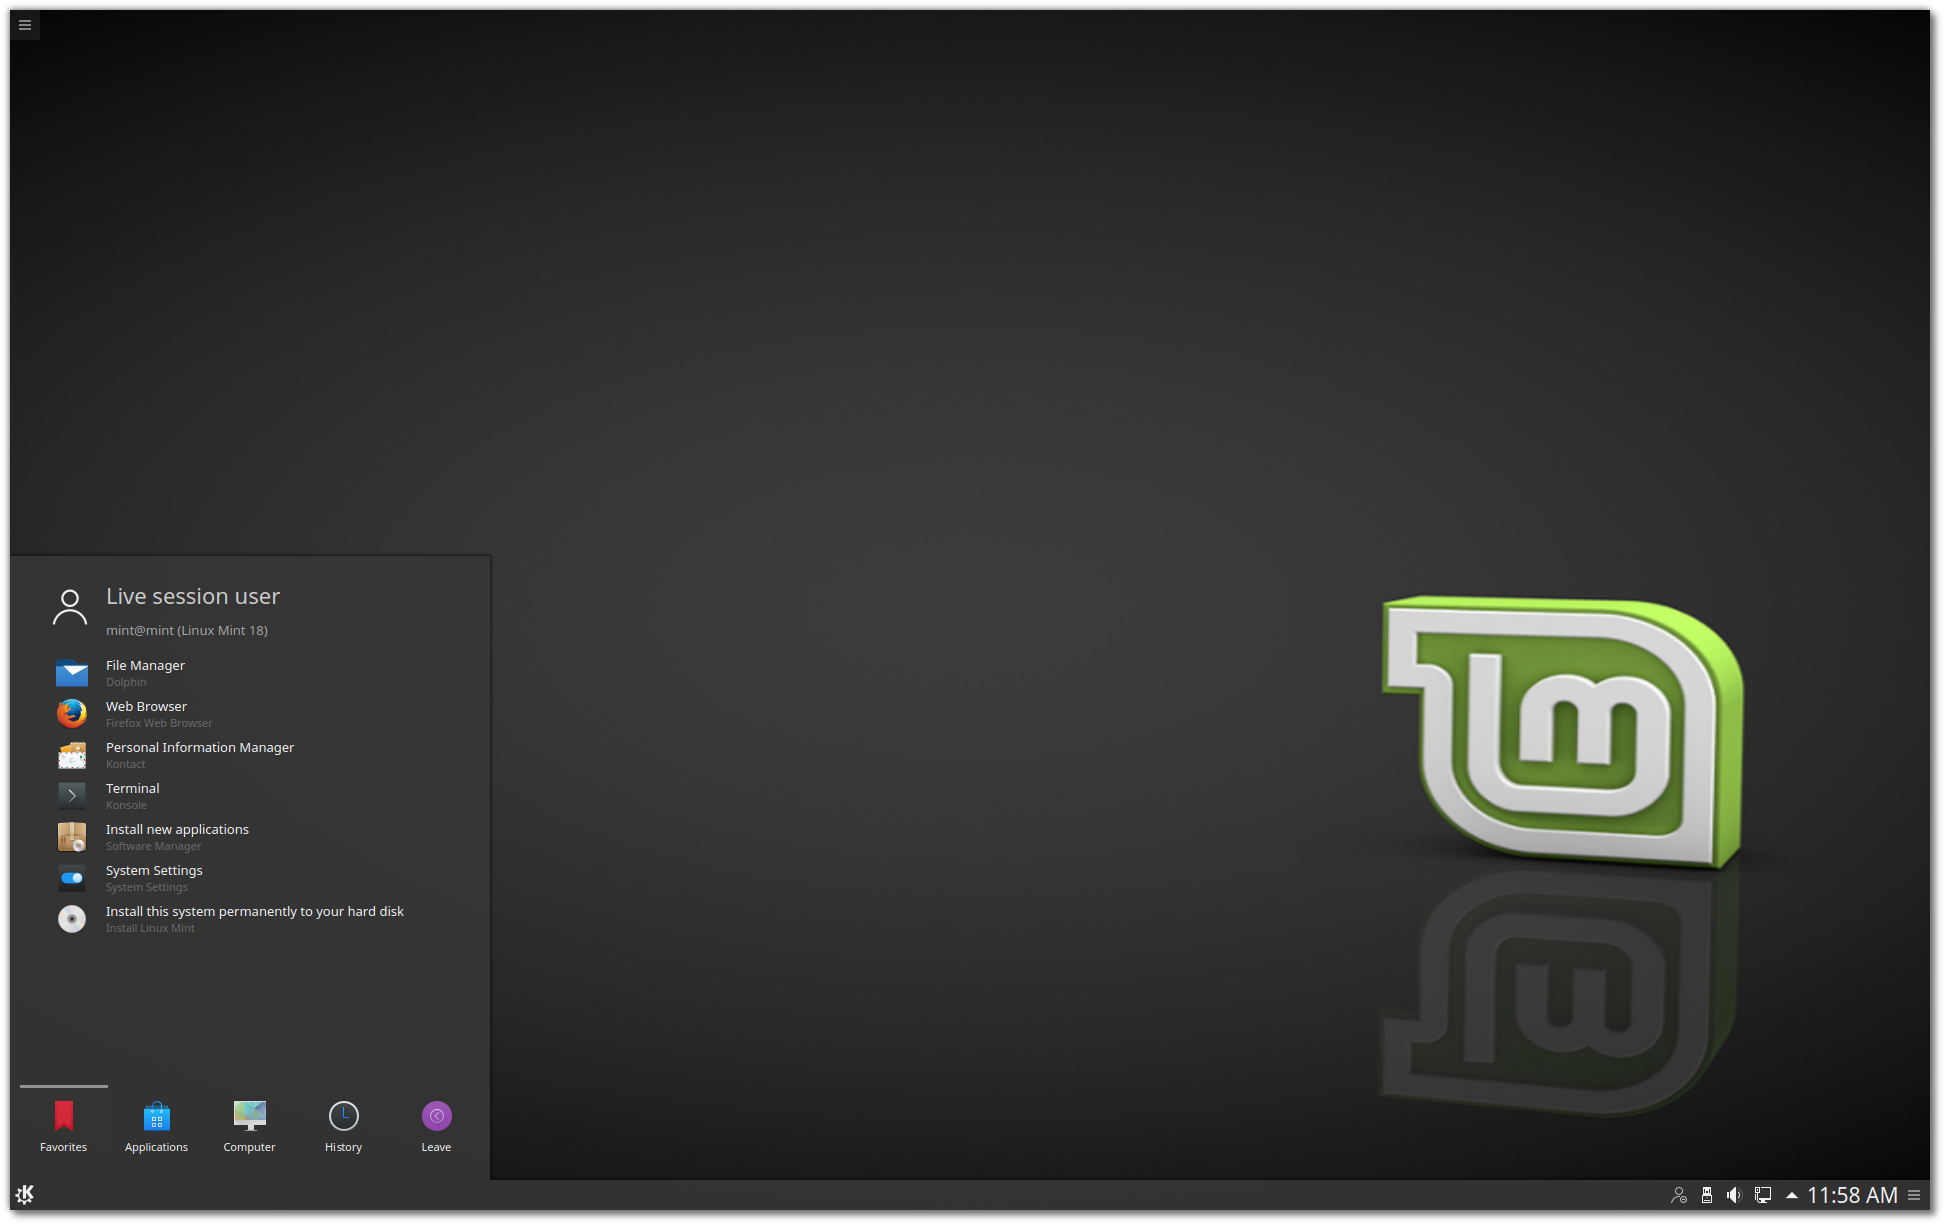 Linux Mint 18 KDE Edition final is available